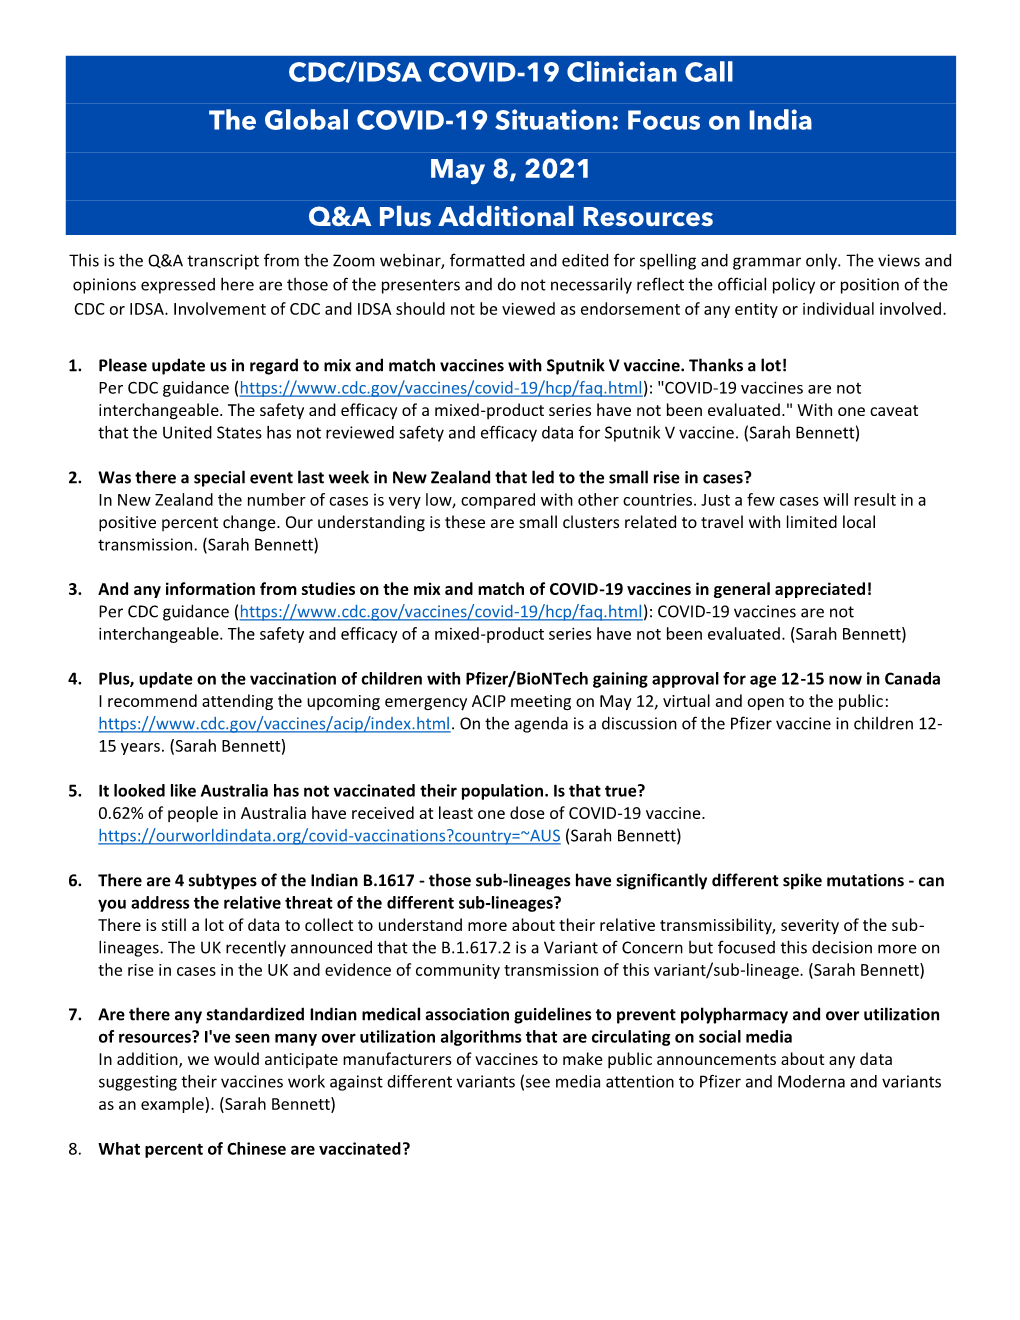 CDC/IDSA COVID-19 Clinician Call the Global COVID-19 Situation: Focus on India May 8, 2021 Q&A Plus Additional Resources